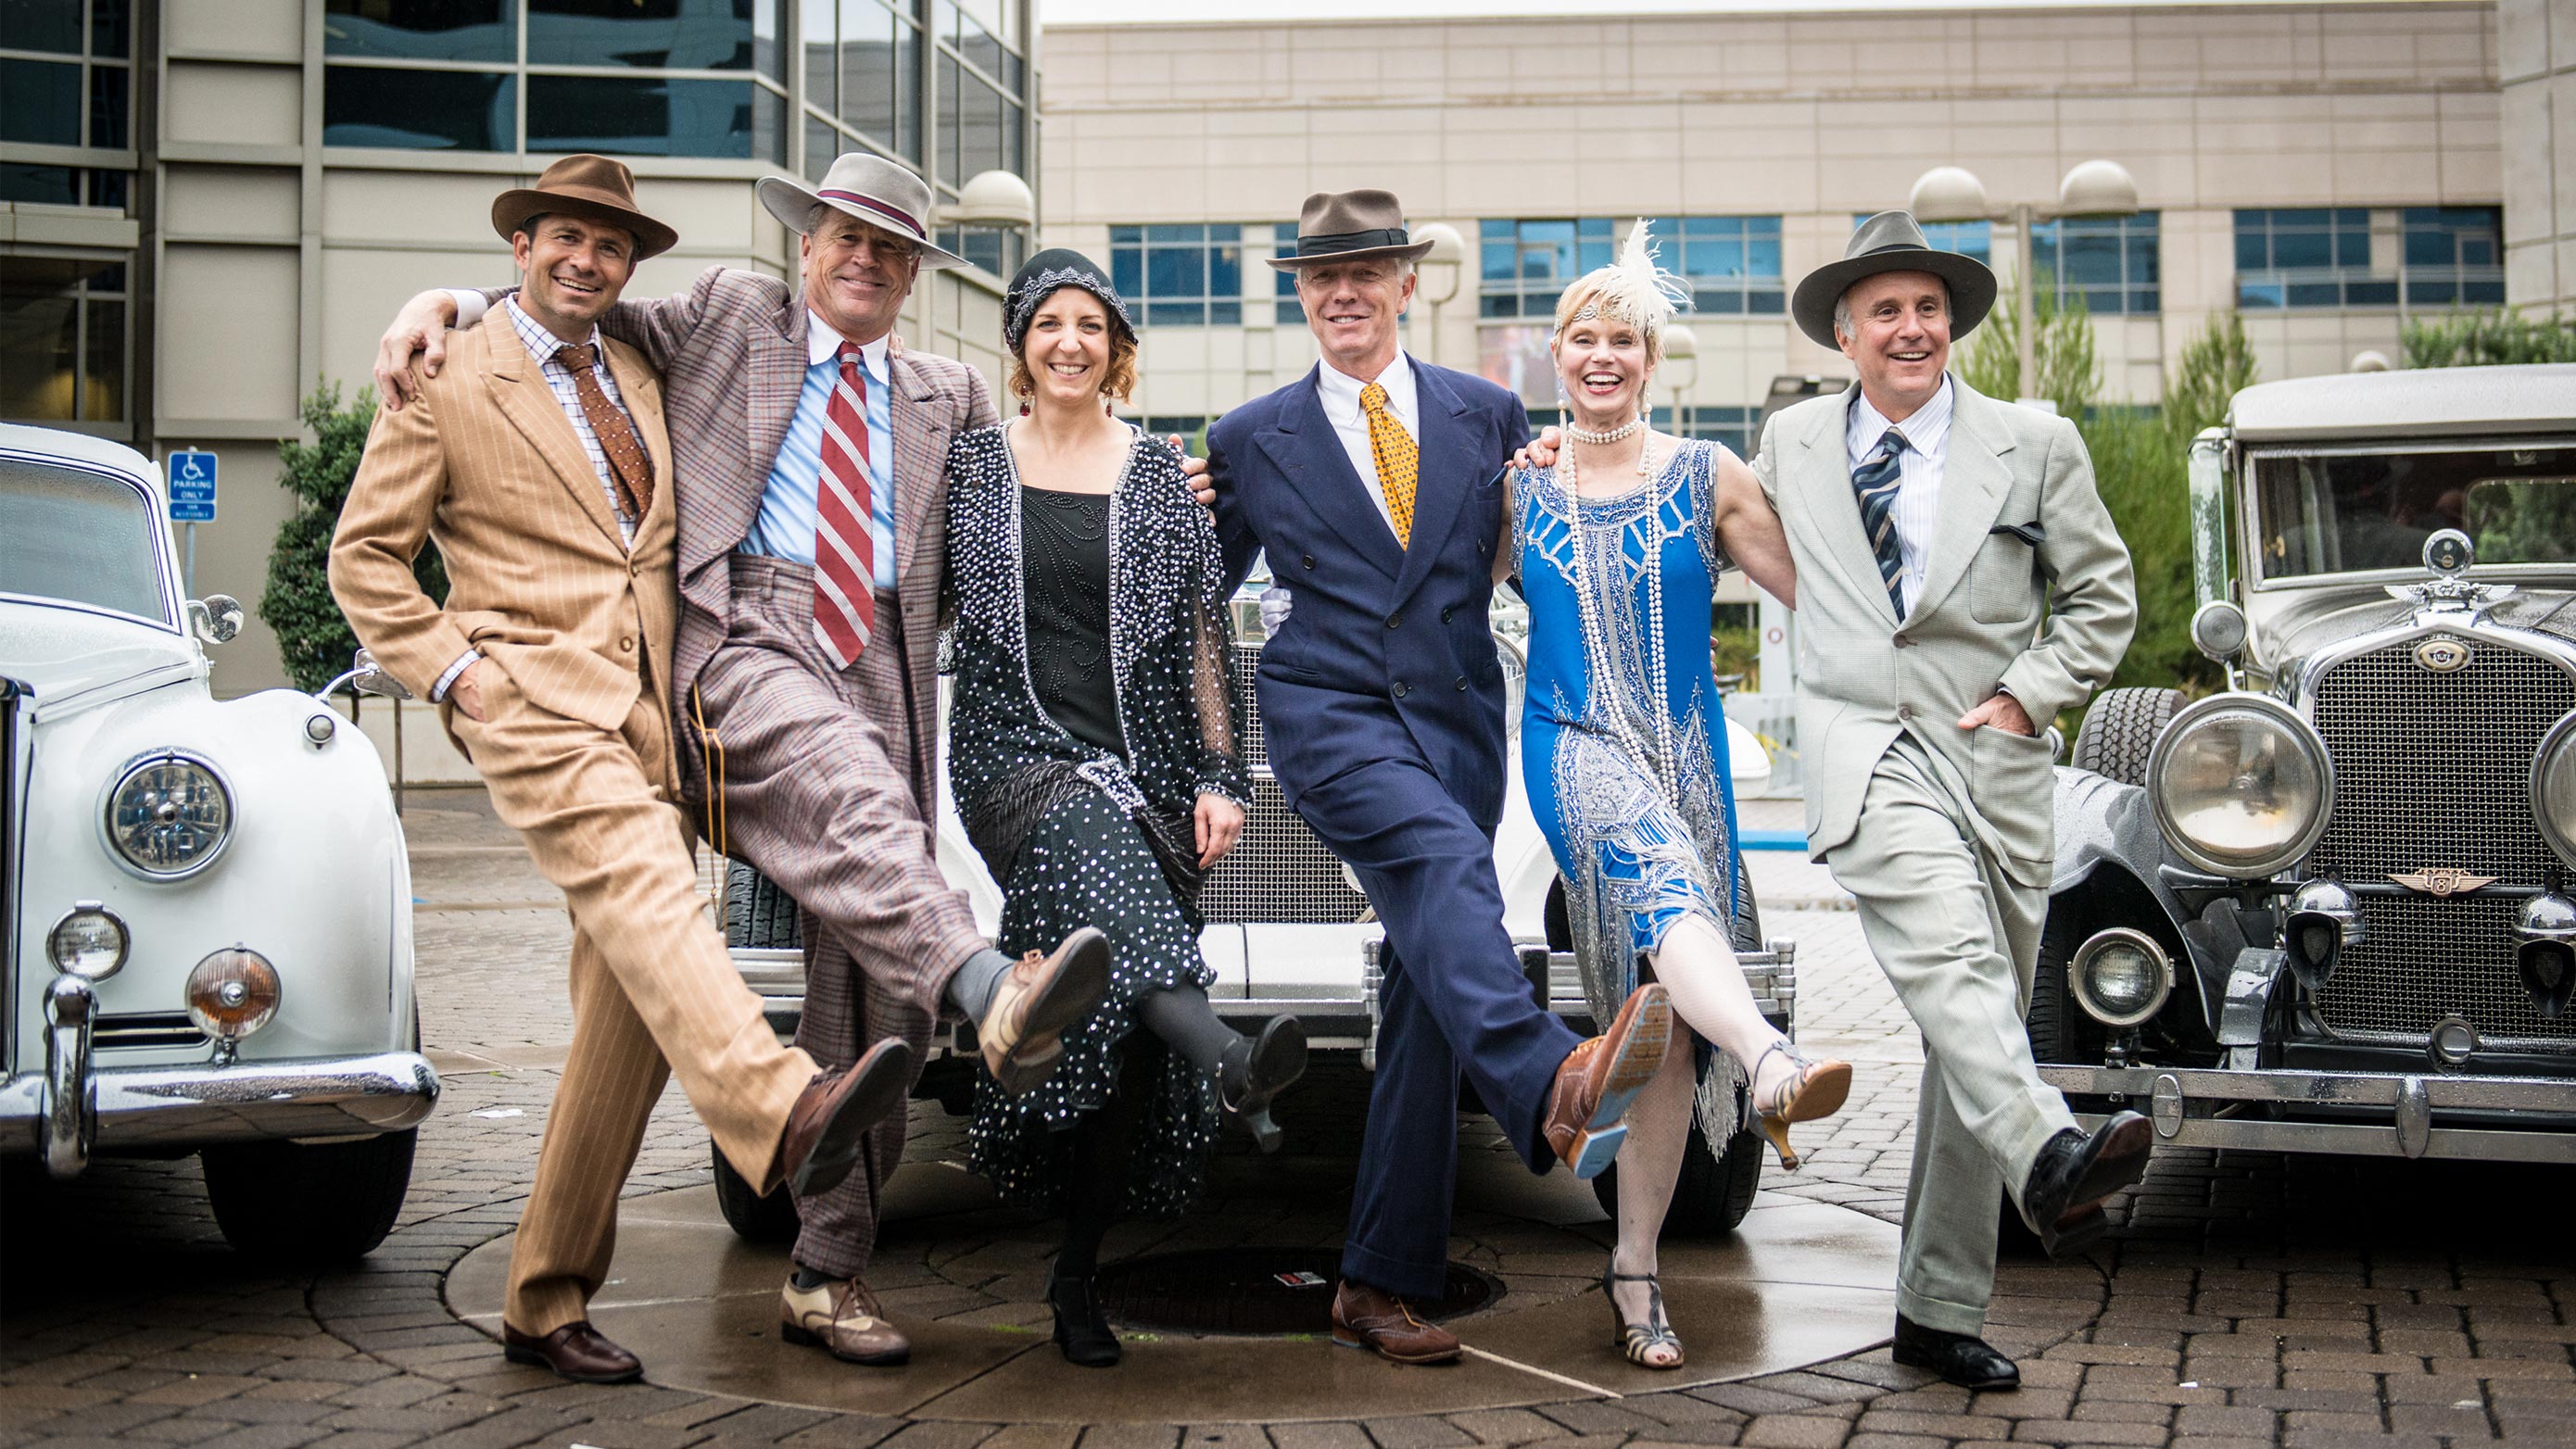 2014 Halloween photo of Genentech Executive Committee members dressed in Great Gatsby-era ensembles.